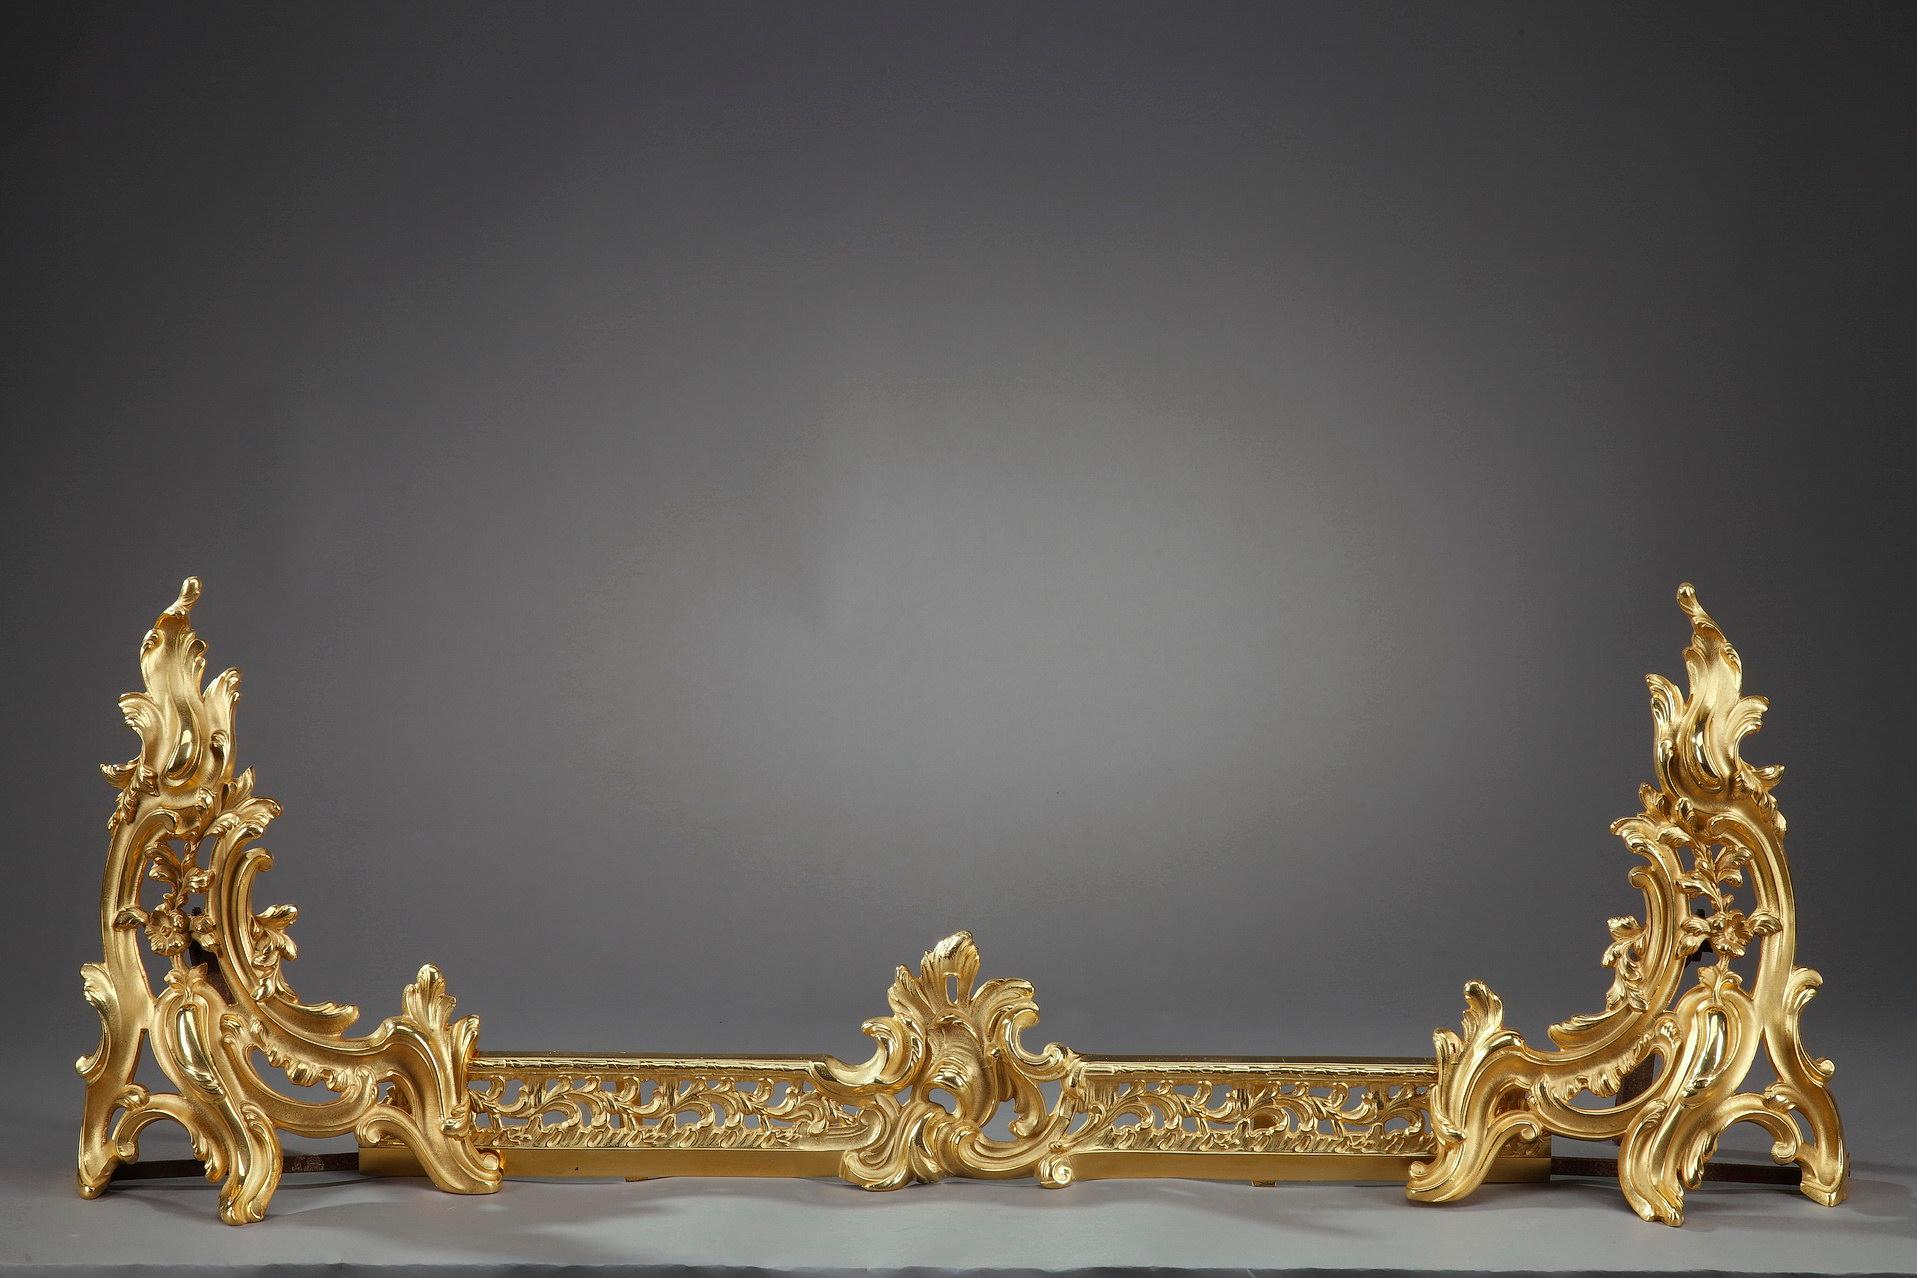 Fire screen crafted of gilt and chiseled bronze featuring an intricate decoration of scrolls, acanthus leaves and flowers in Rococo style. With a fireplace fender and a pair of andirons, or chenets, embellished with naturalistic motifs in Louis XV